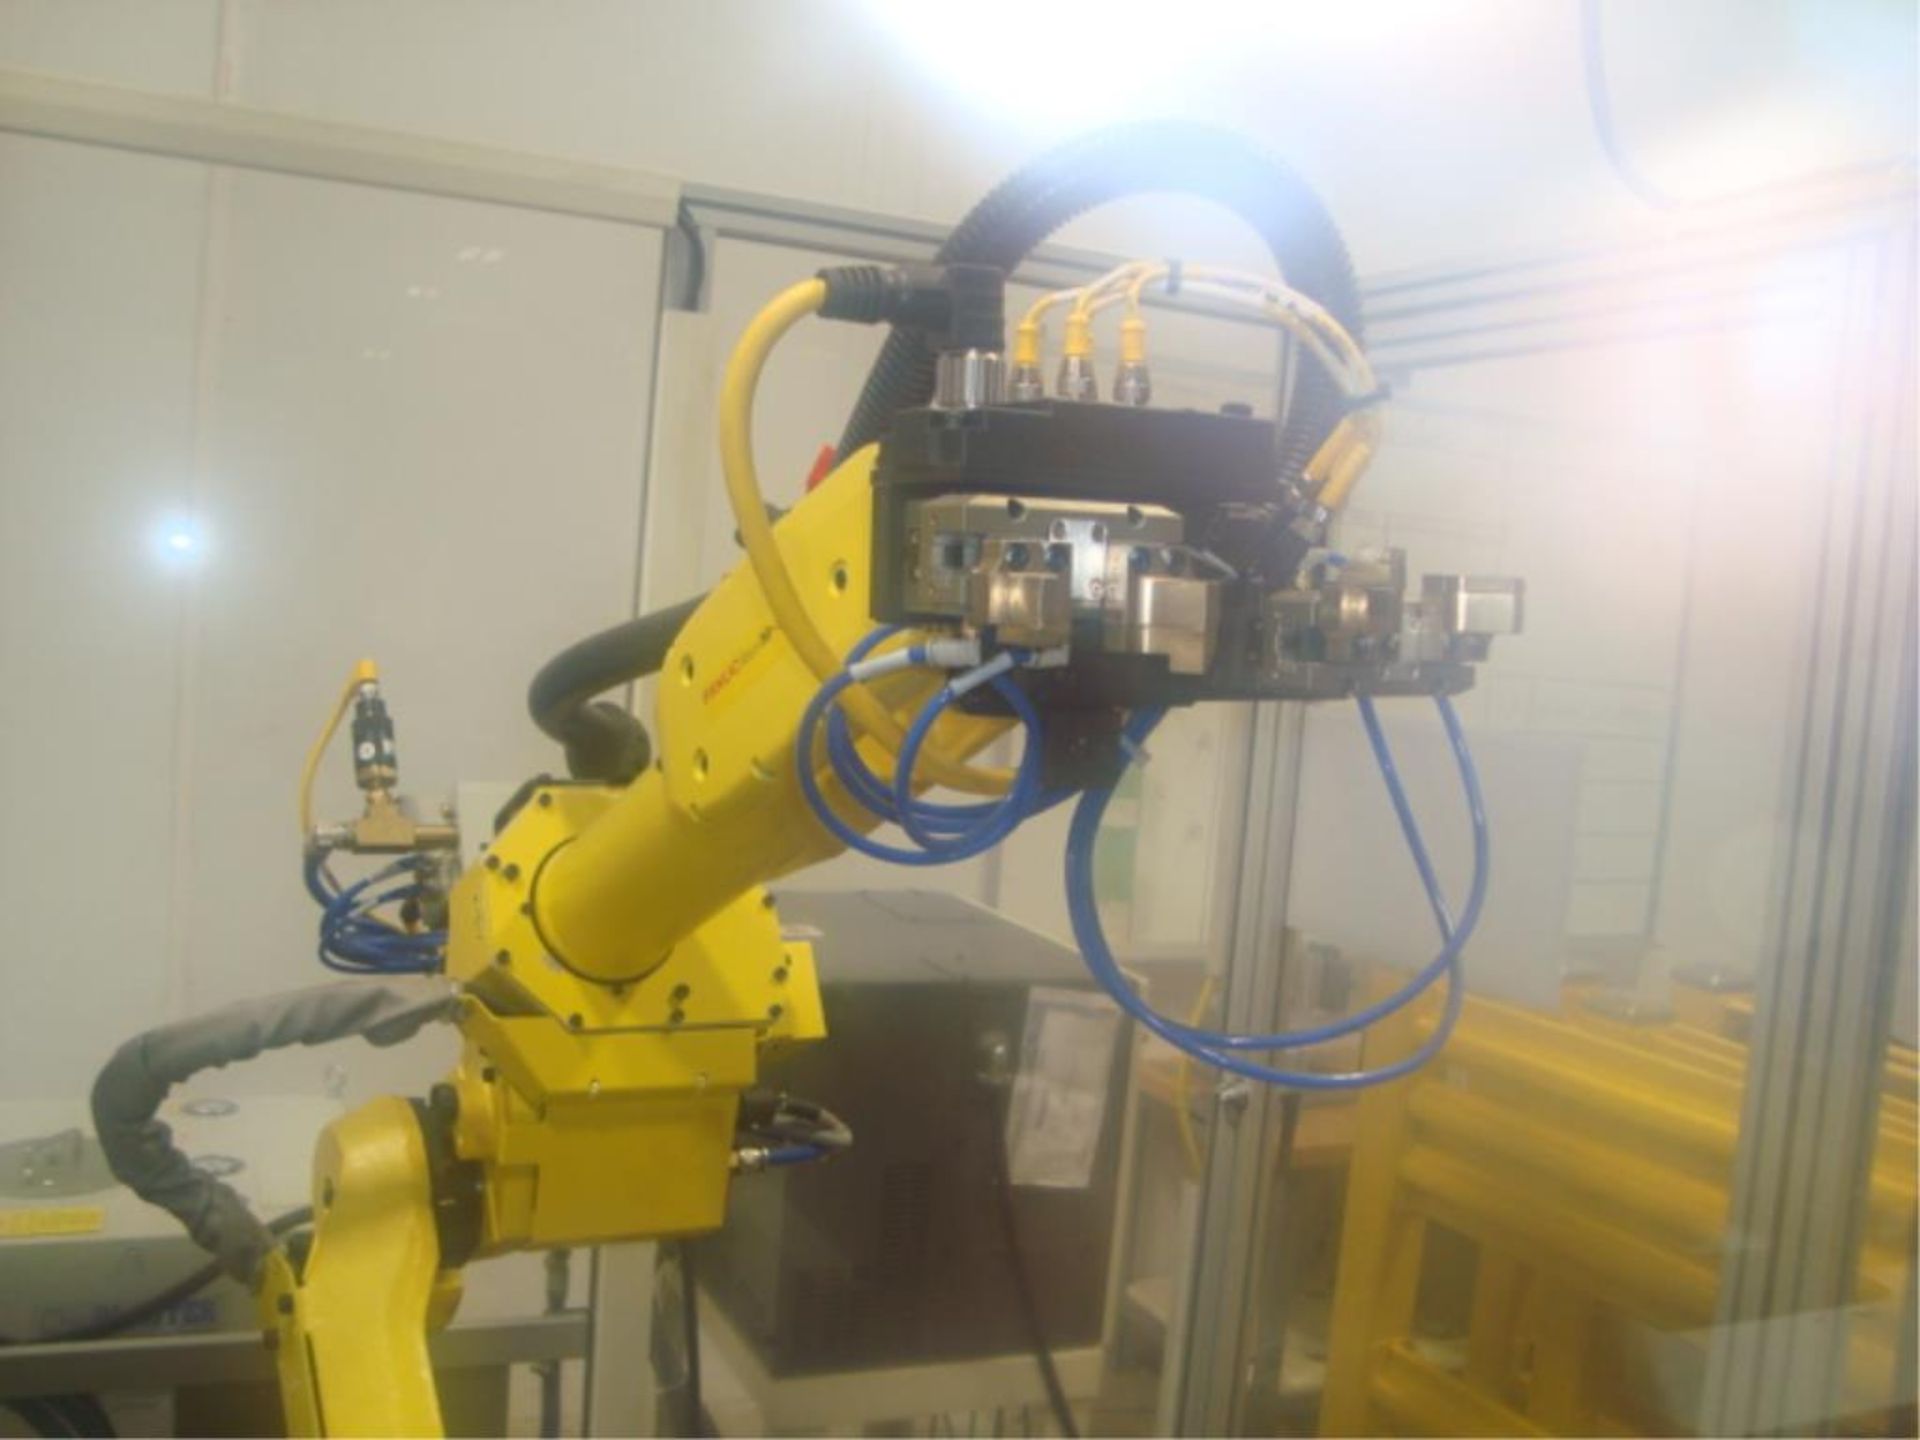 Fanuc Robodrill Alpha-D21MiA5 with Fanuc M-10iA 6-Axis Robot - Image 14 of 60